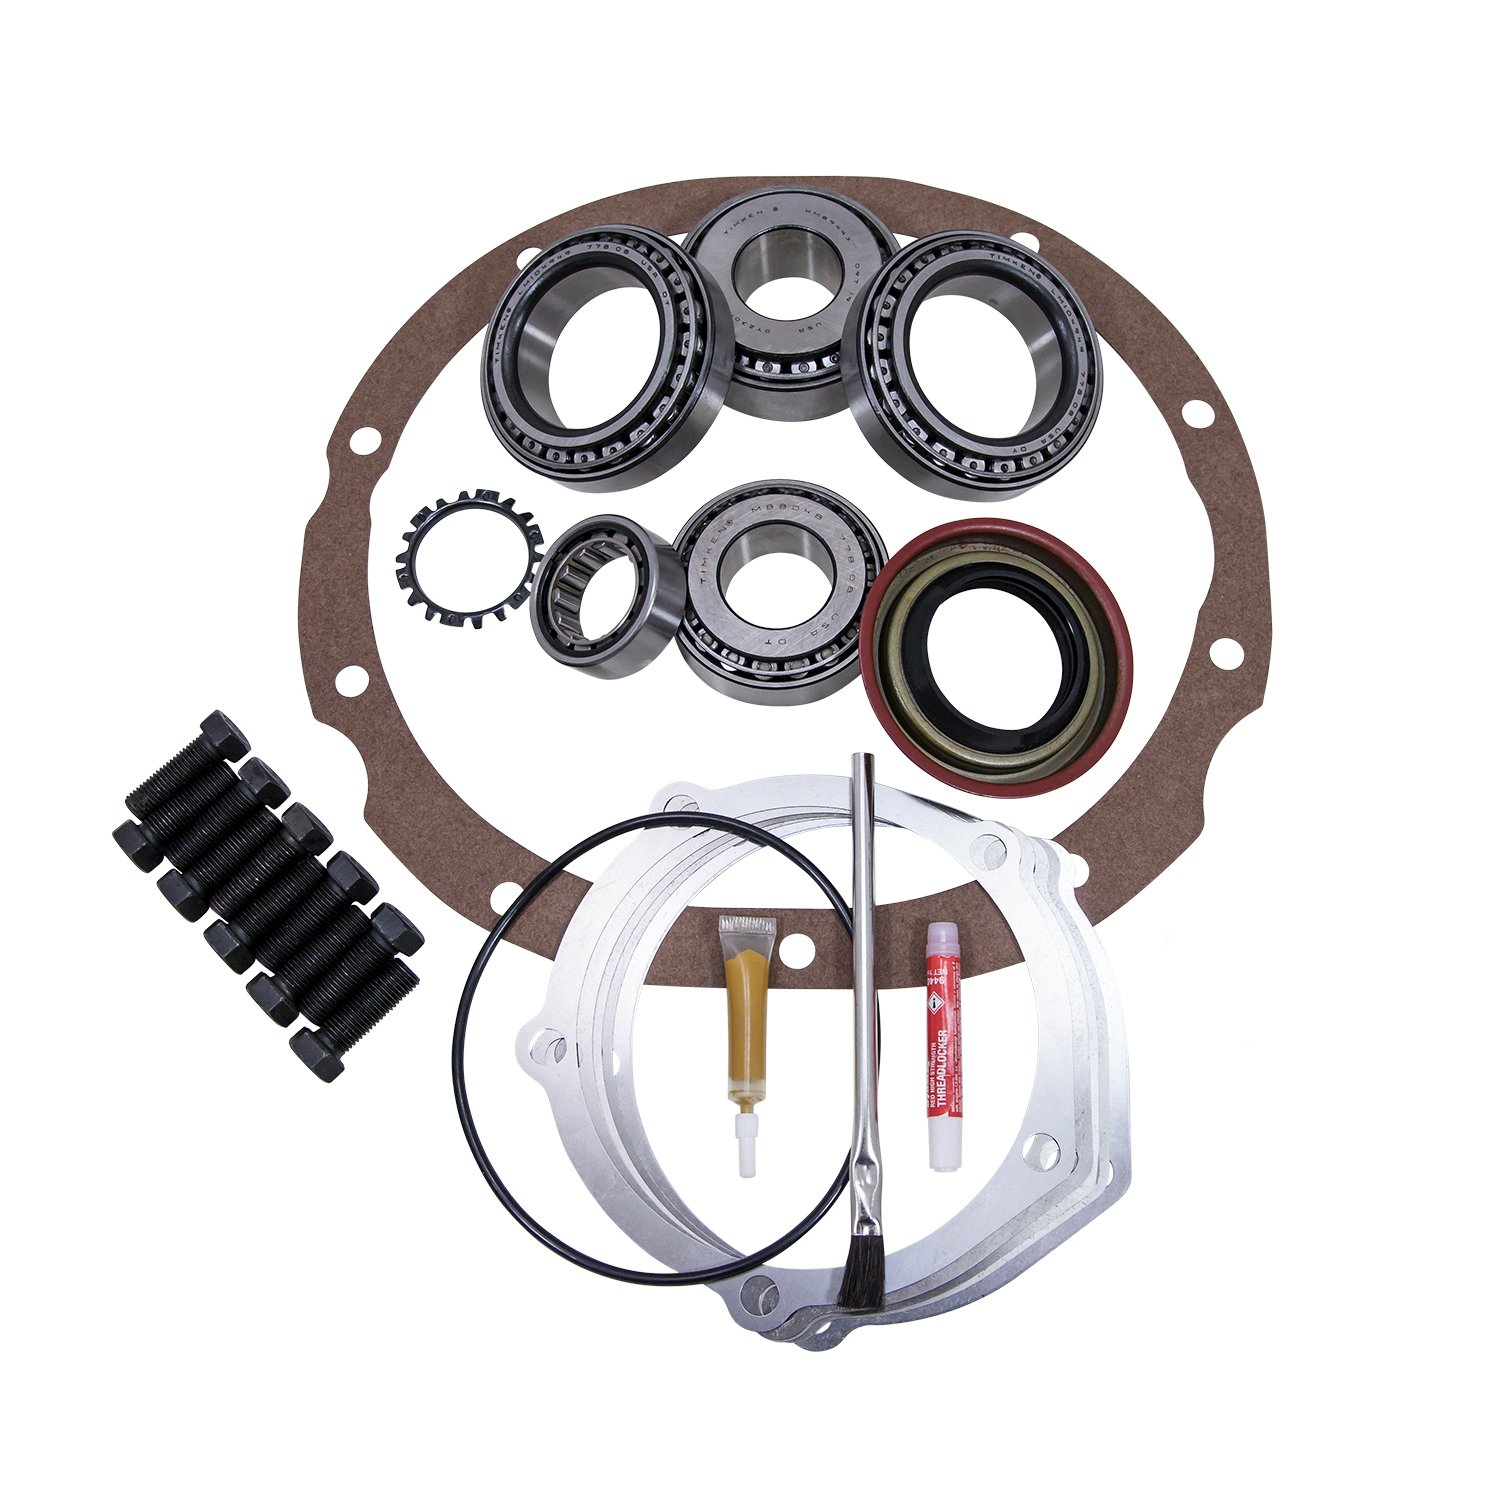 Master Overhaul Kit For Ford 9 in. Lm104911 Differential, 35 Spline Pinion